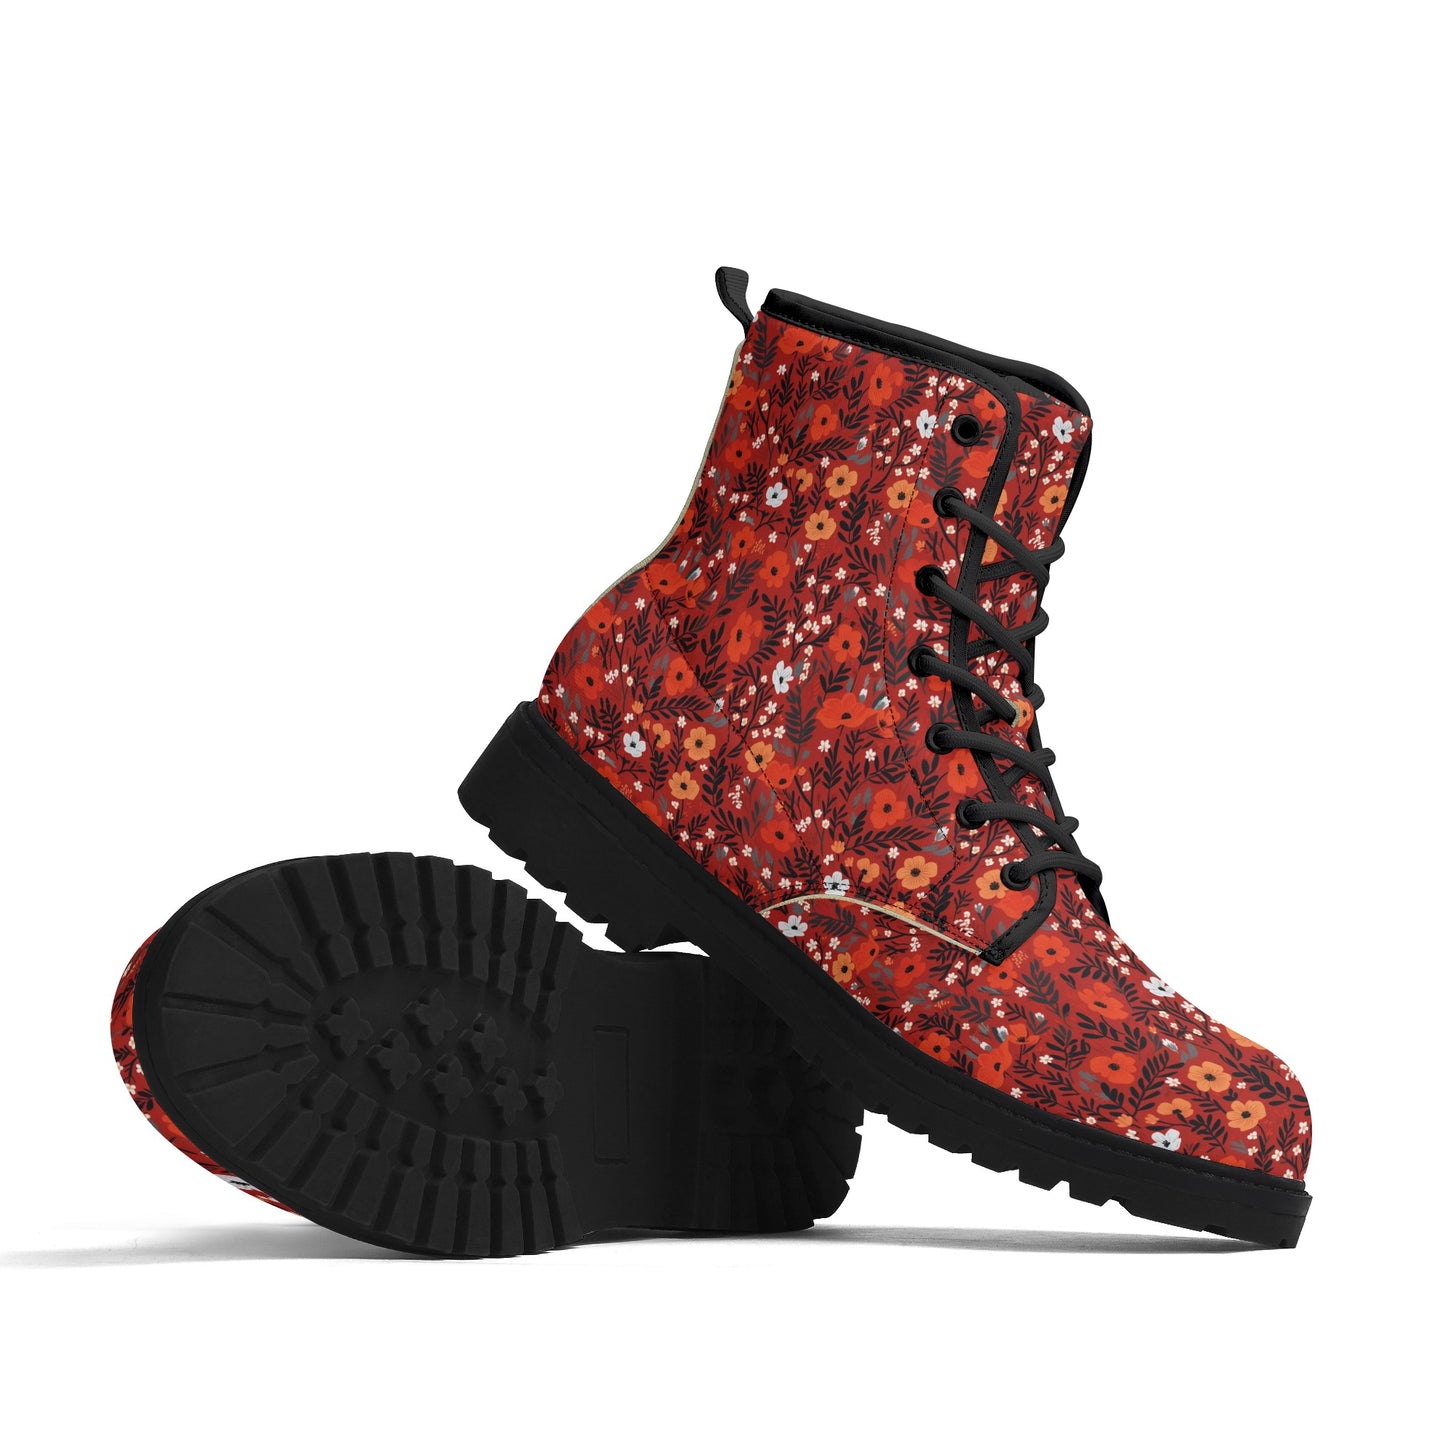 Red Floral Women Leather Boots, Flowers Vegan Lace Up Shoes Hiking Festival Black Ankle Combat Work Winter Waterproof Custom Ladies